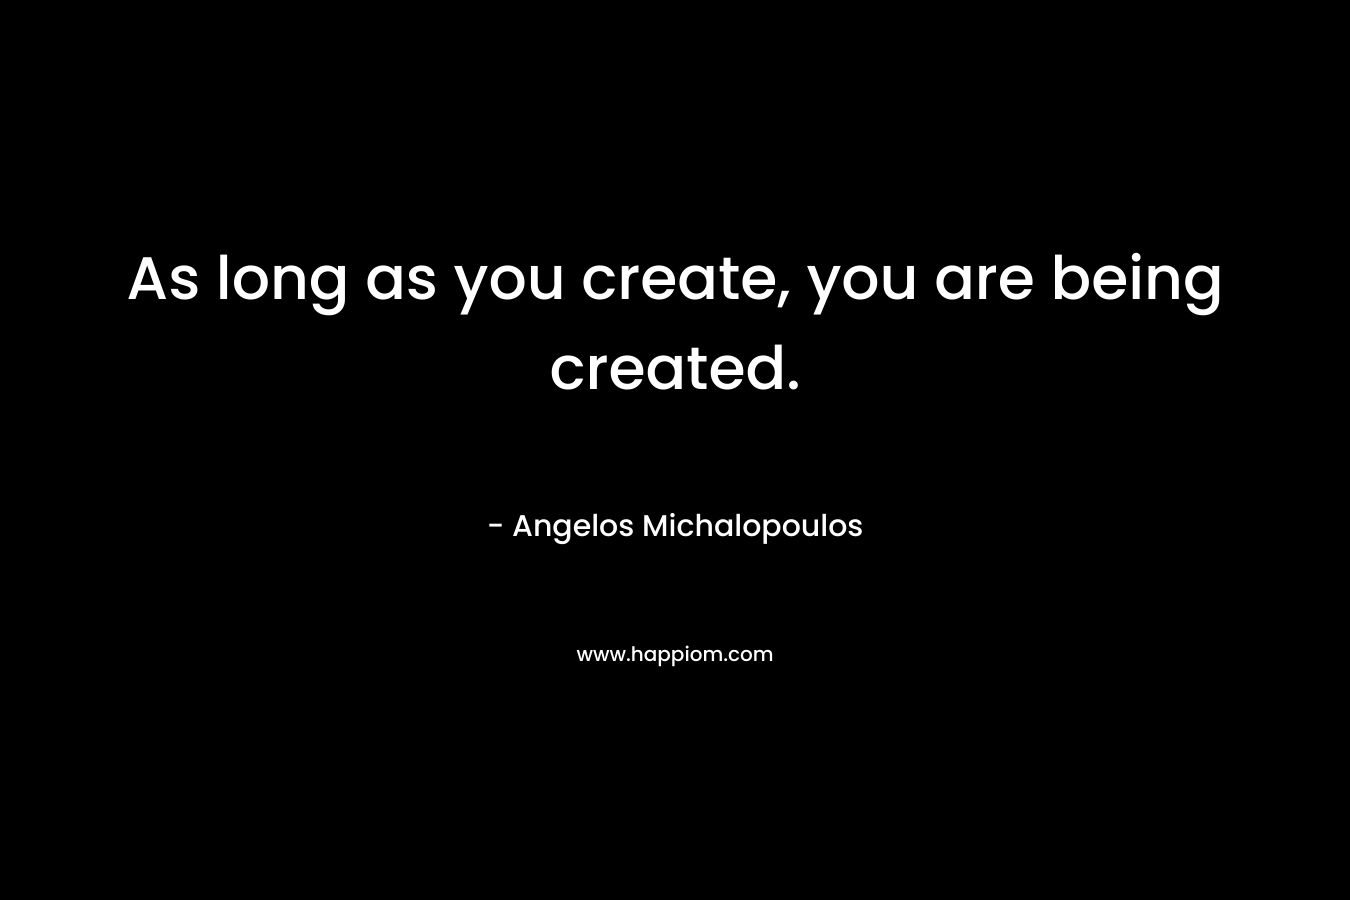 As long as you create, you are being created.